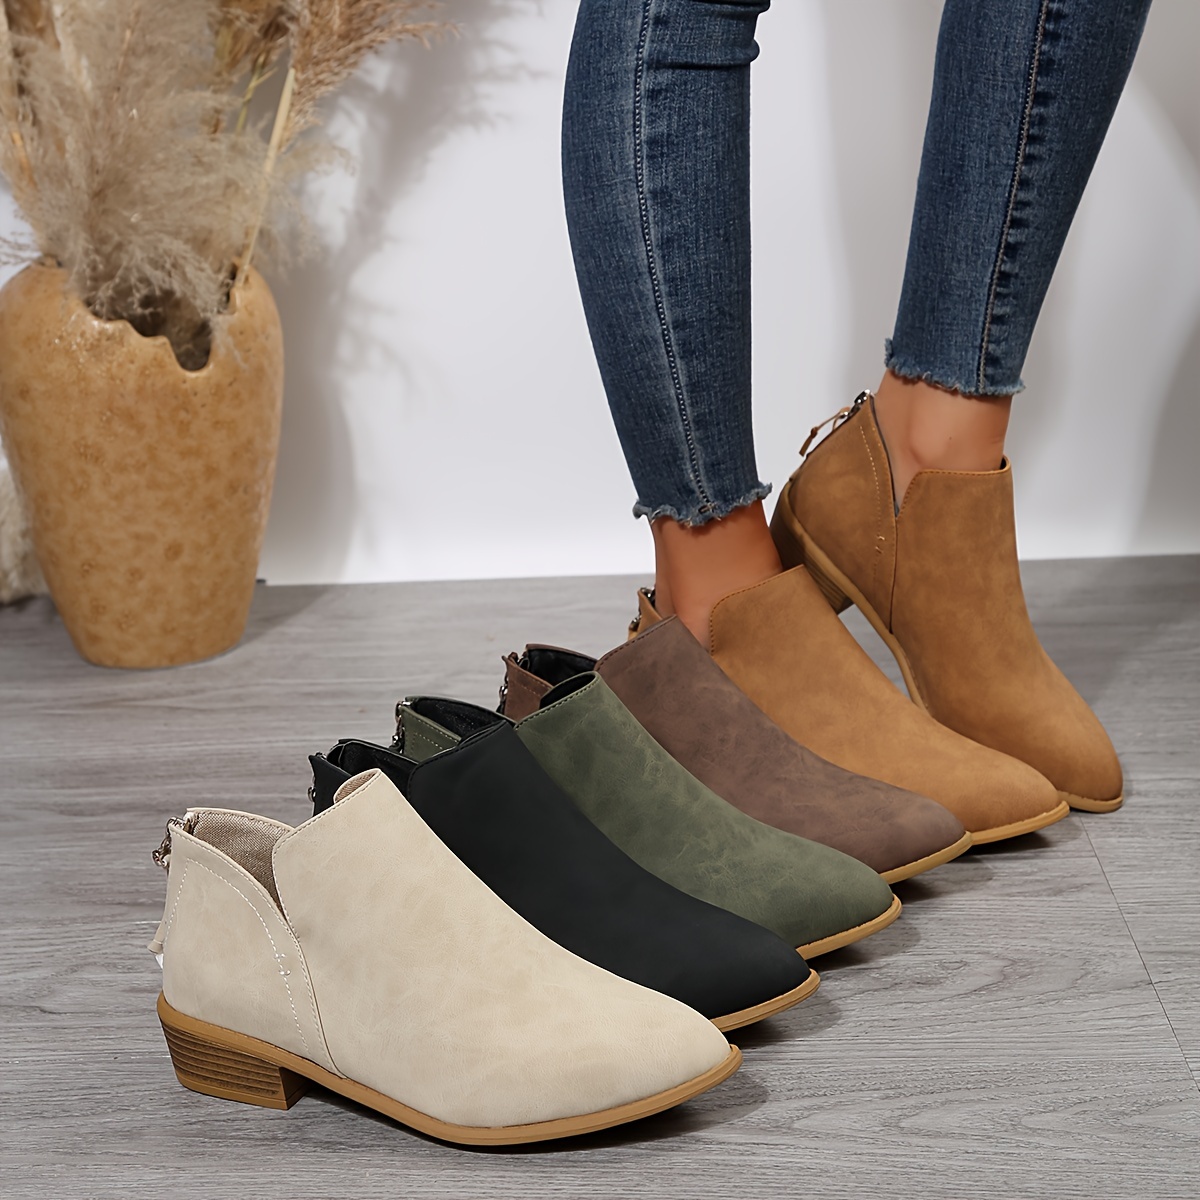 Wide Shoes for Women